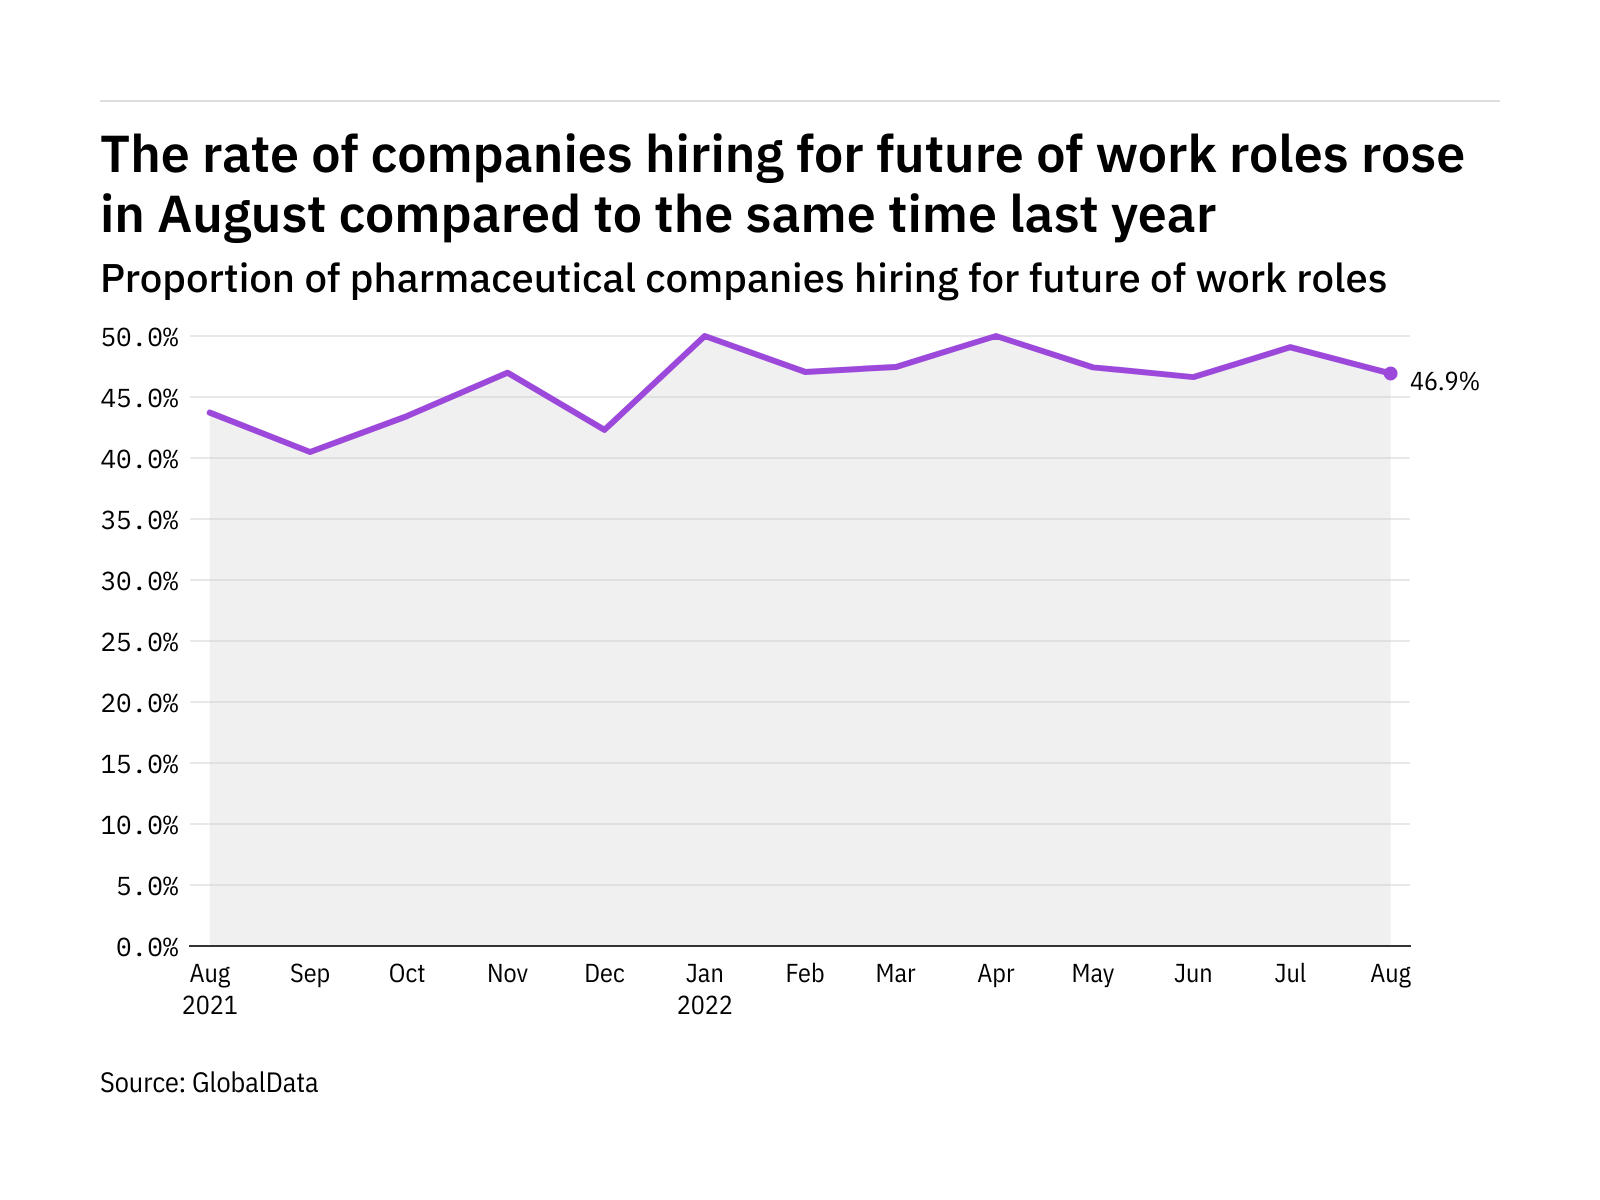 Future of work hiring levels in the pharmaceutical industry rose in August 2022